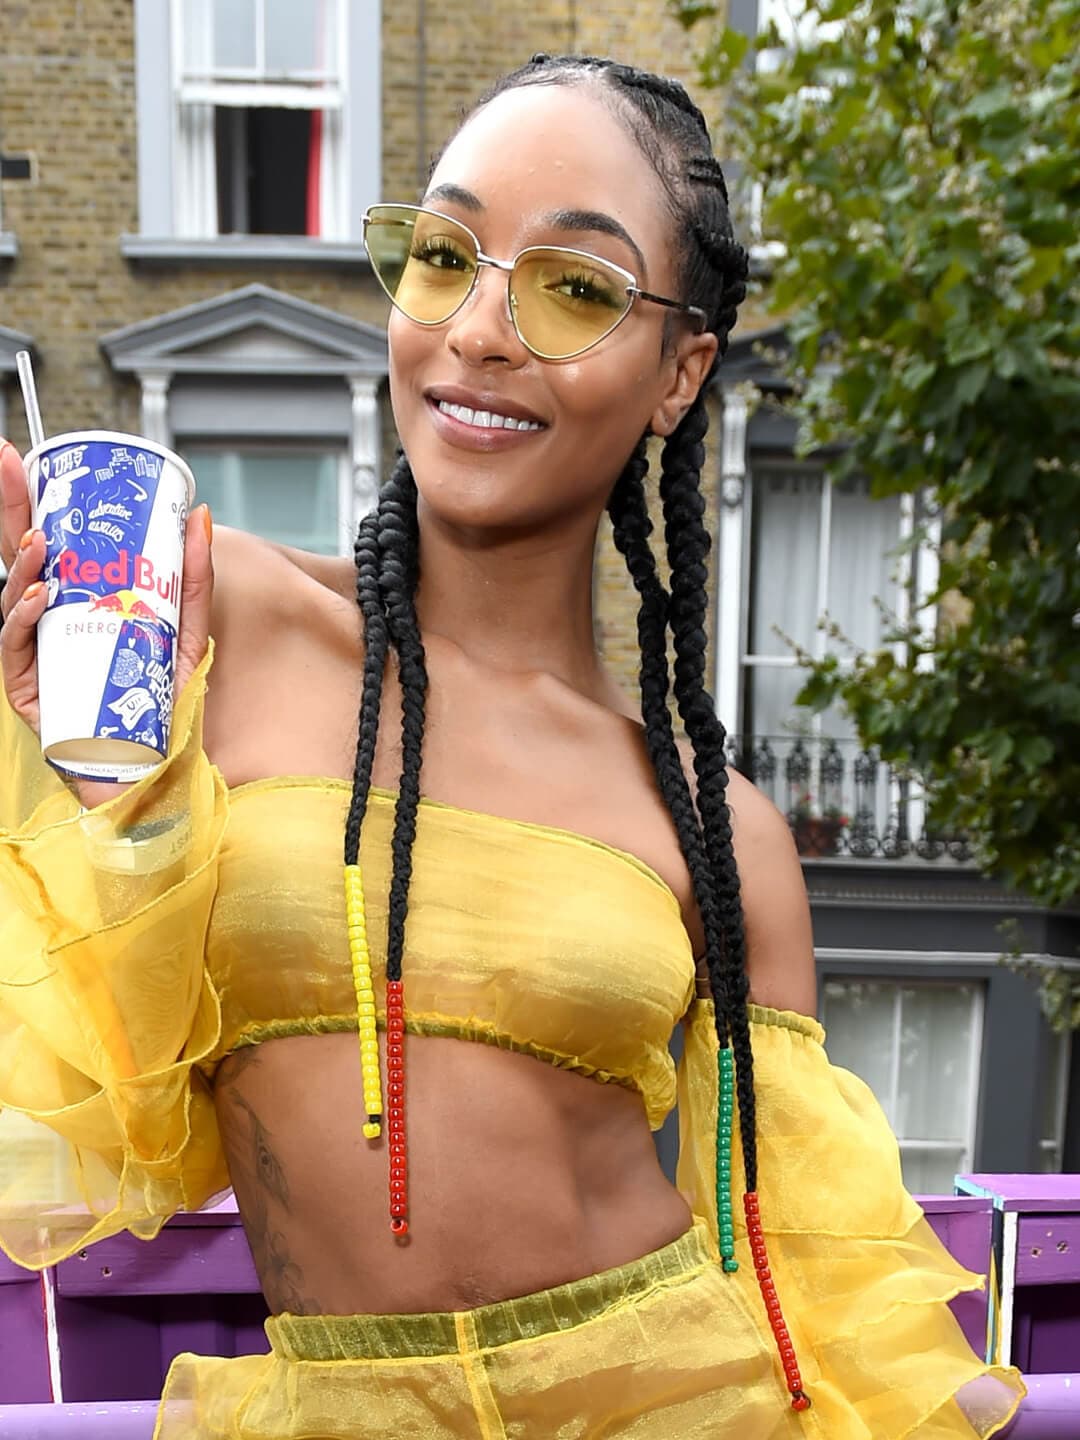 Jourdan Dunn sporting a long, braided hairstyle with colorful wraps at the end and yellow outfit while holding a can of Red Bull